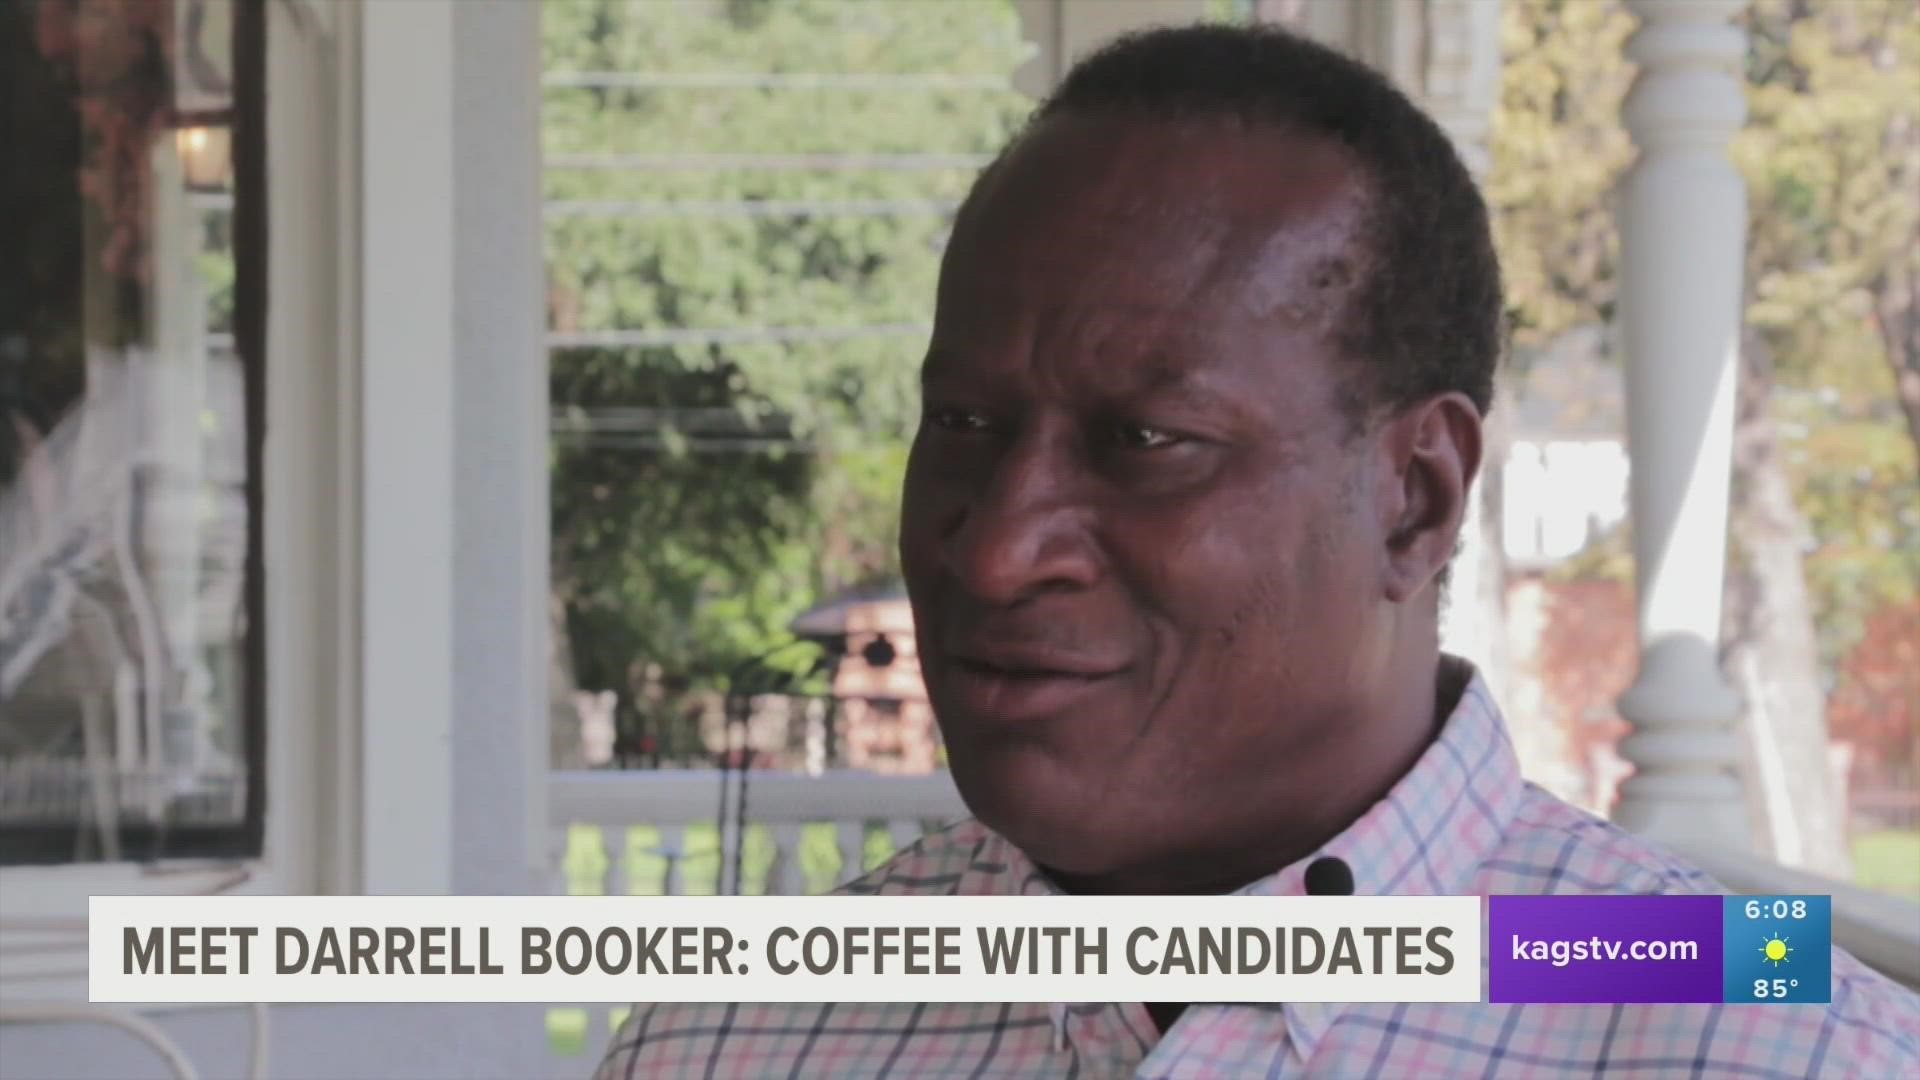 Darrell Booker, who said he previously worked for the Brazos County Sheriff's Office, has decided to run for Justice of the Peace for Precinct 4.